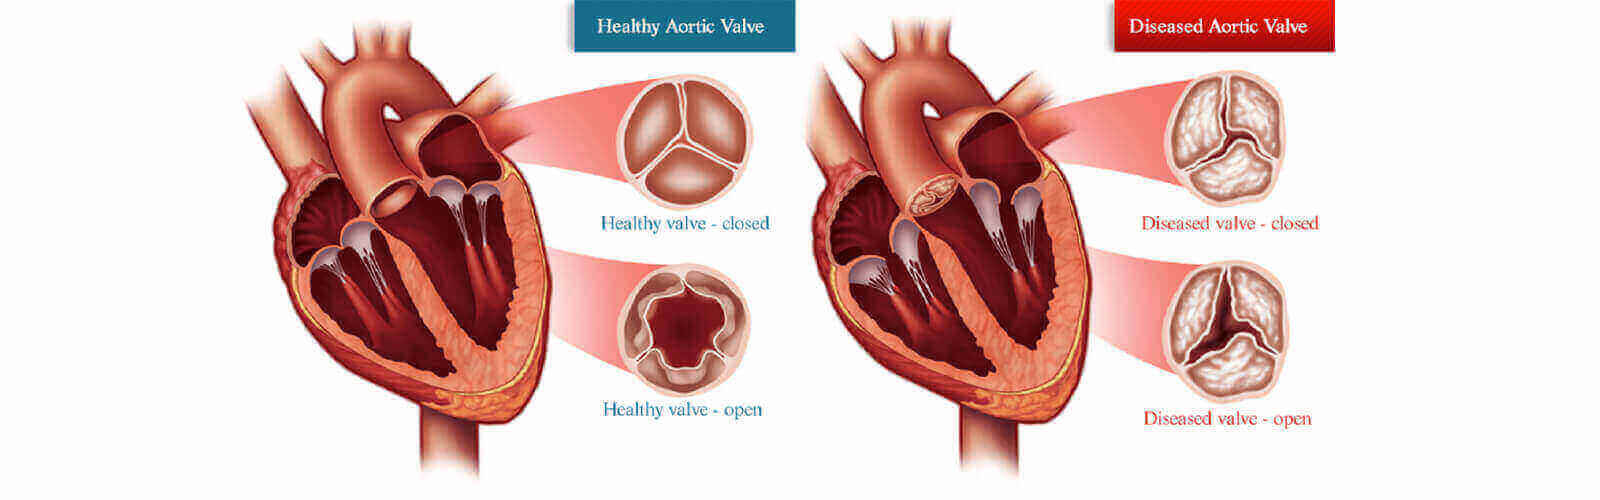 Heart Valve Replacement Surgery in Us